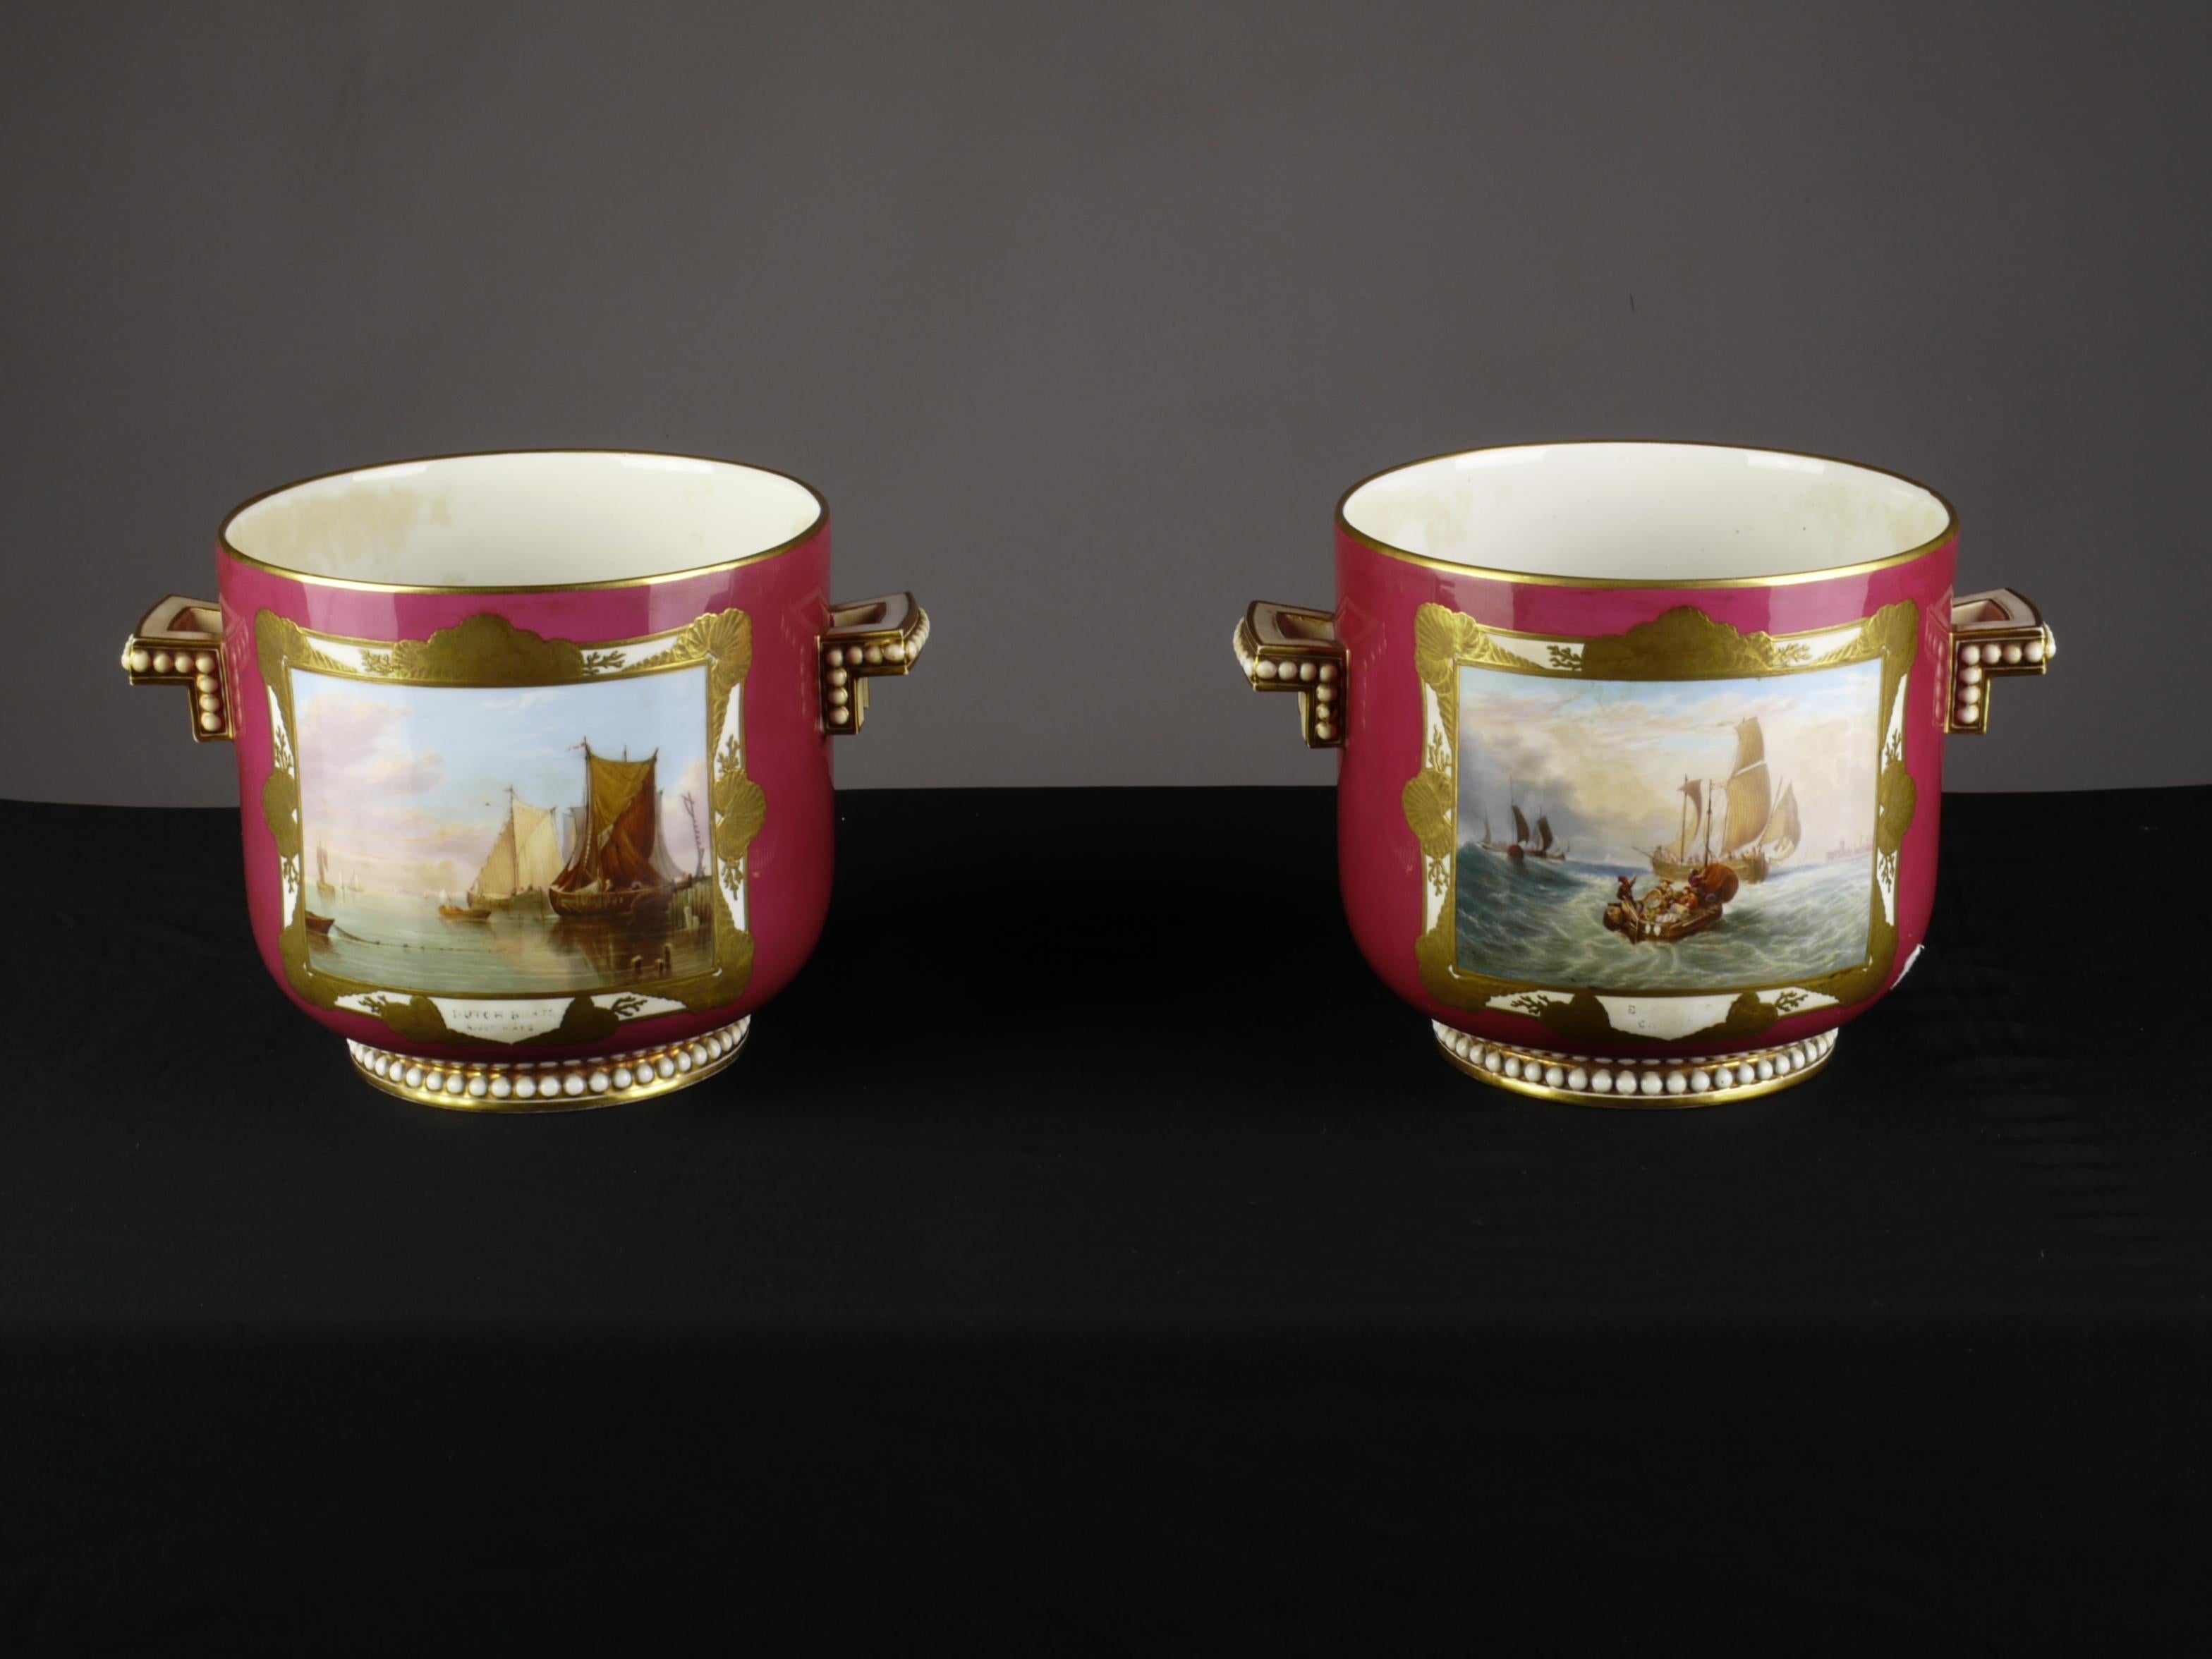 Gilded and painted. The ruby red base color on the round body is provided with two rectangular handles. Represent different views with a trompe l'oeil seashell edged frame. Probably Copeland, indistinct signing 71 in red and 67 printed. Including